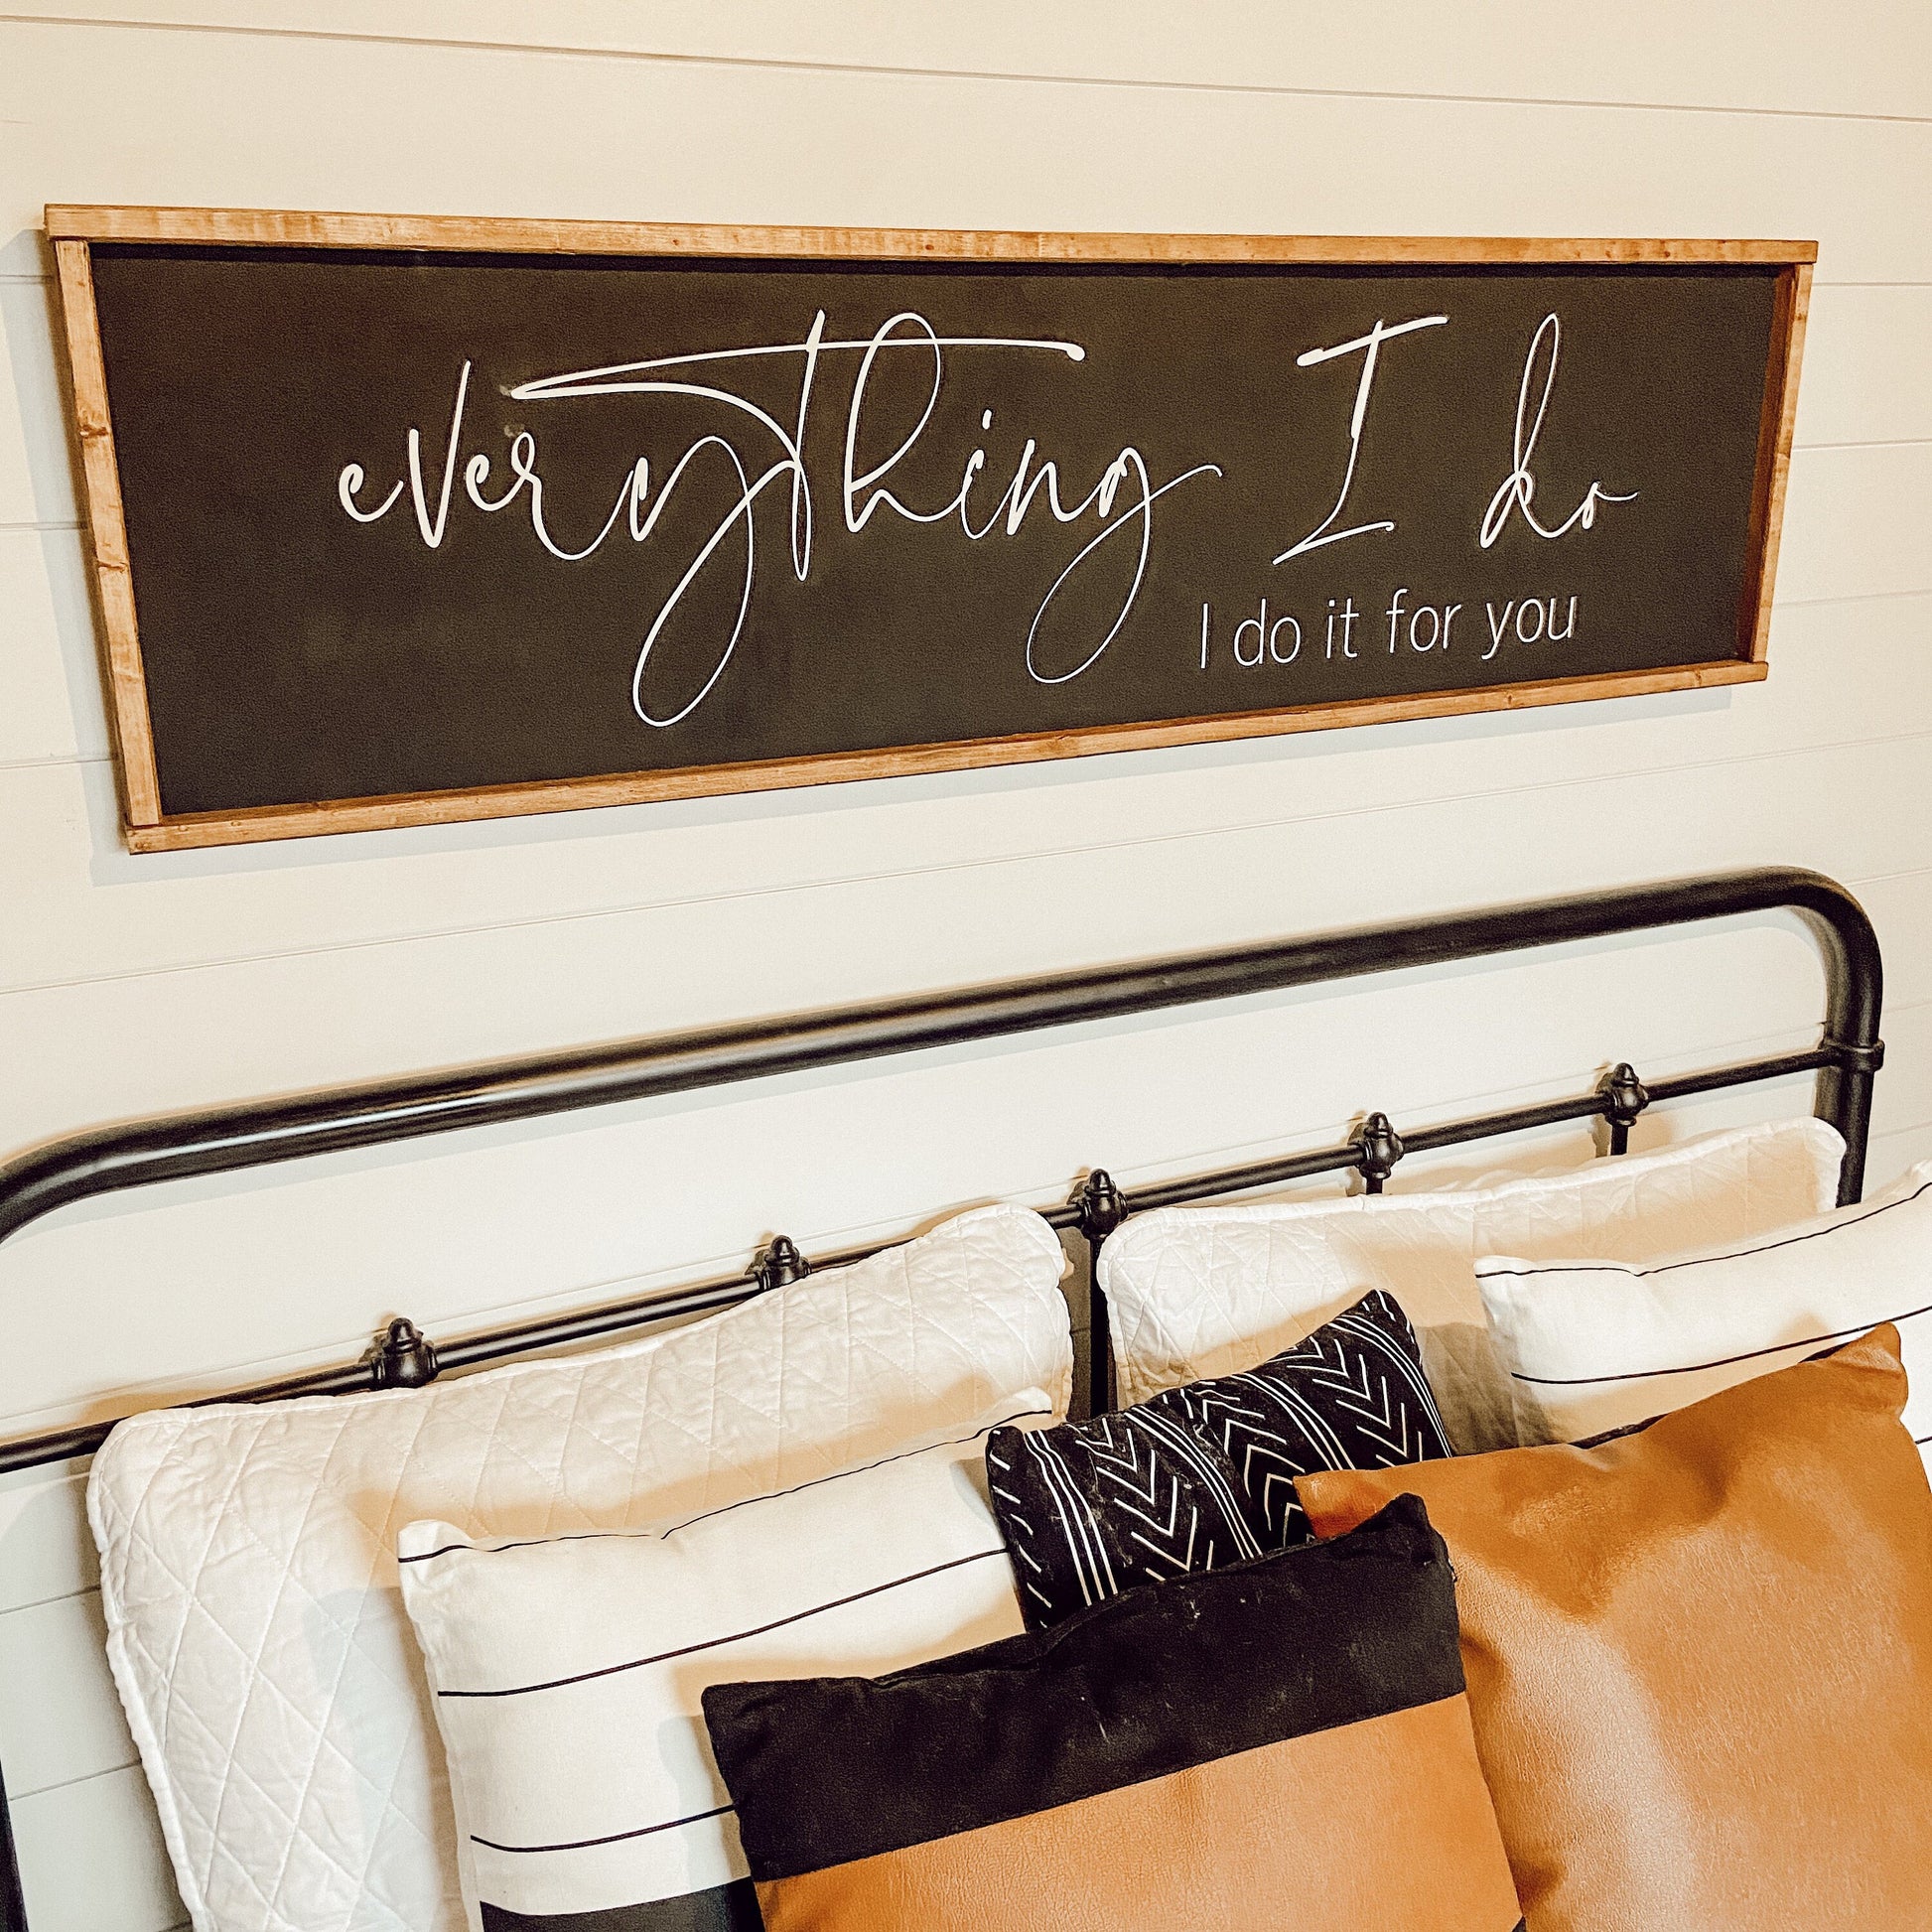 everything I do - above the bed sign [FREE SHIPPING!]